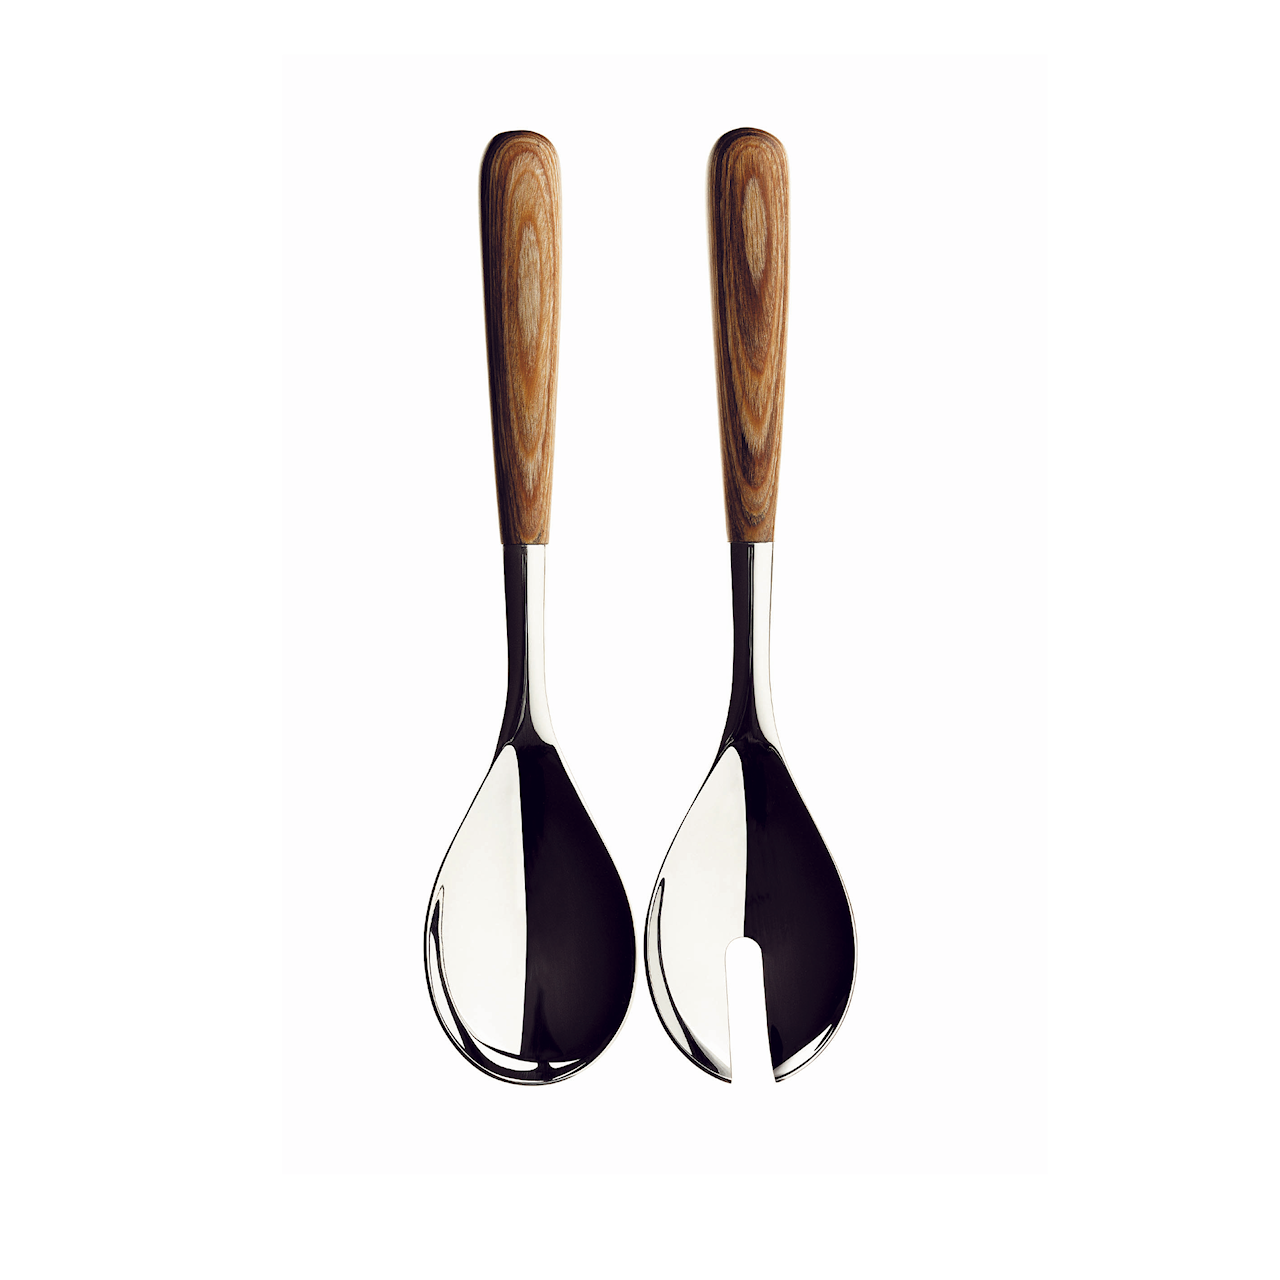 Piano Serving Cutlery 2-Pack